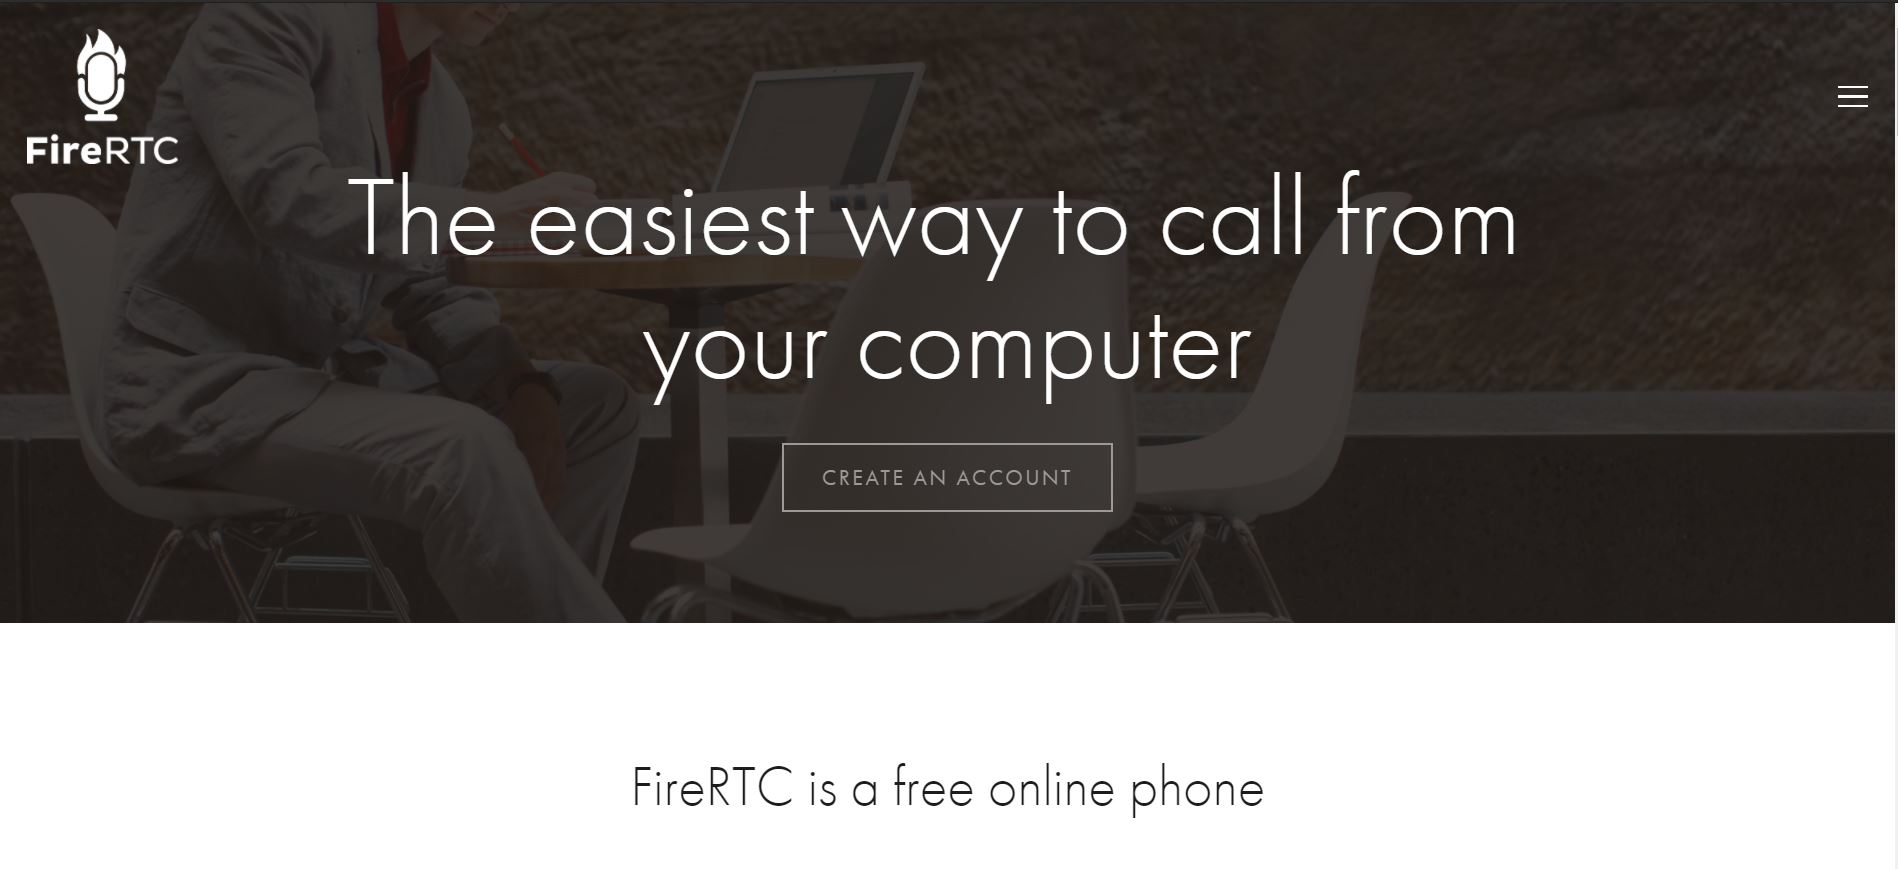 Get feedback from a vast remote working audience about FireRTC